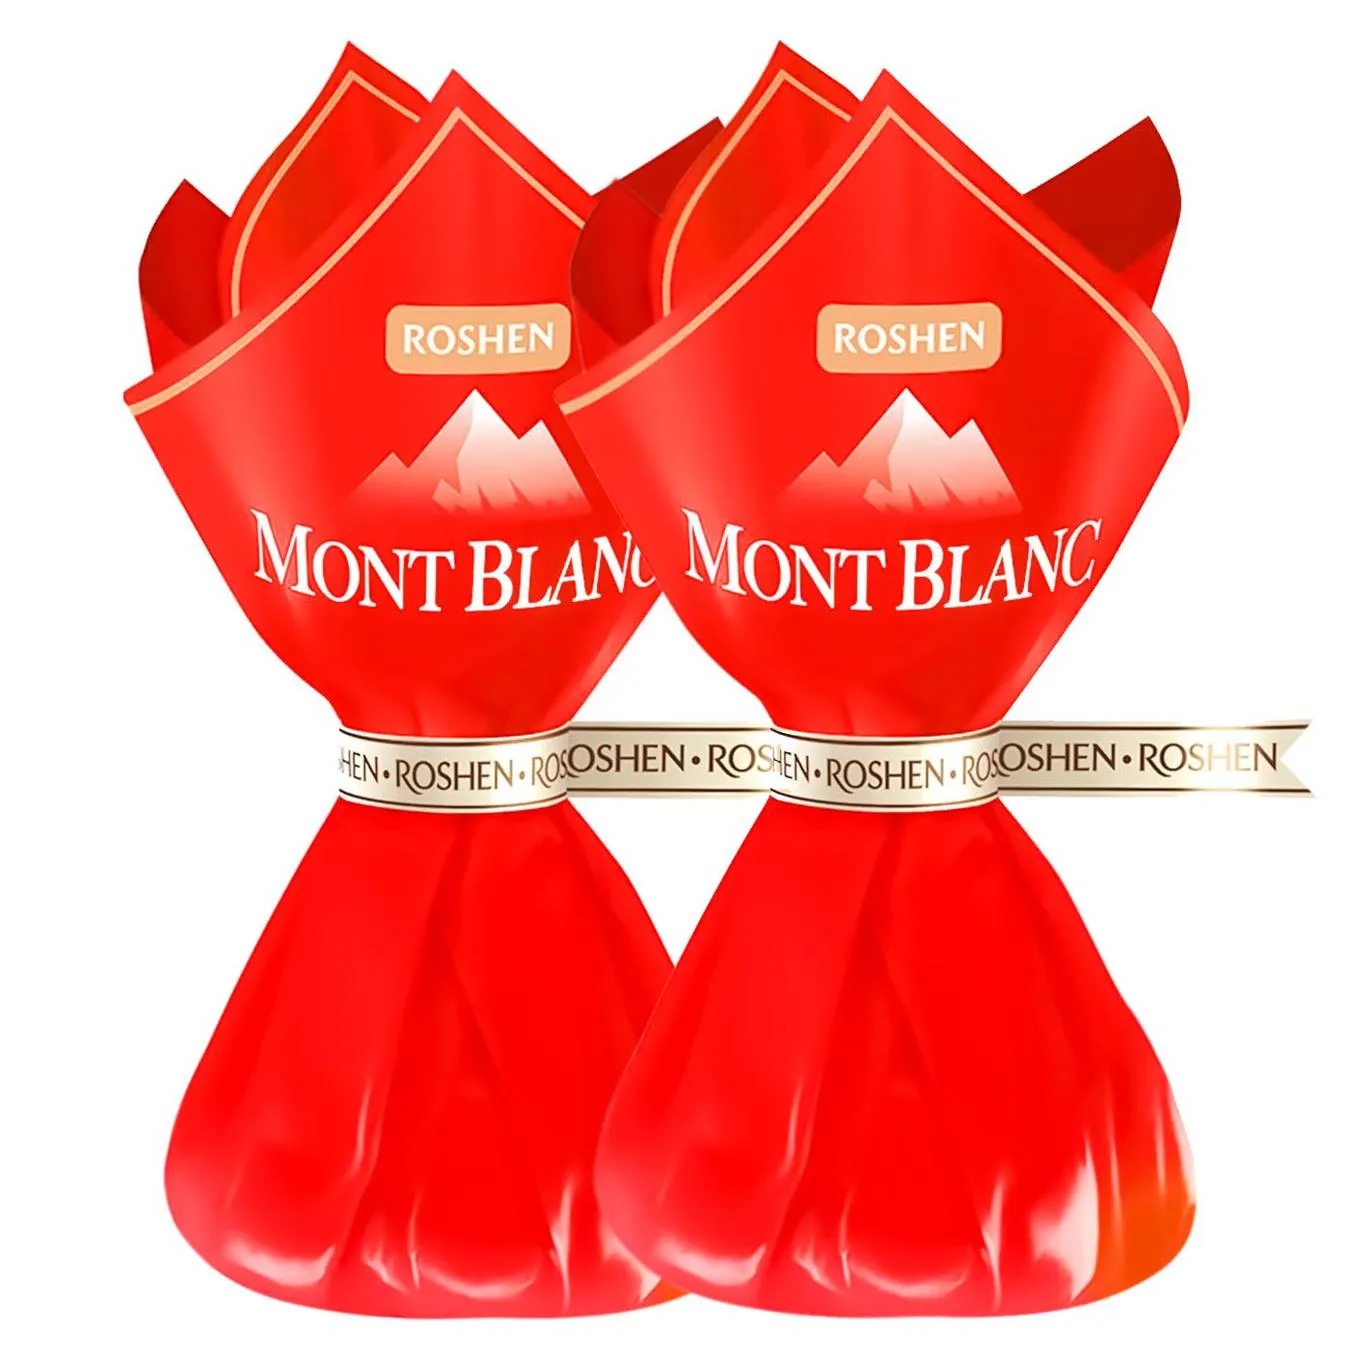 Roshen Mont Blanc candies with caramelized almonds